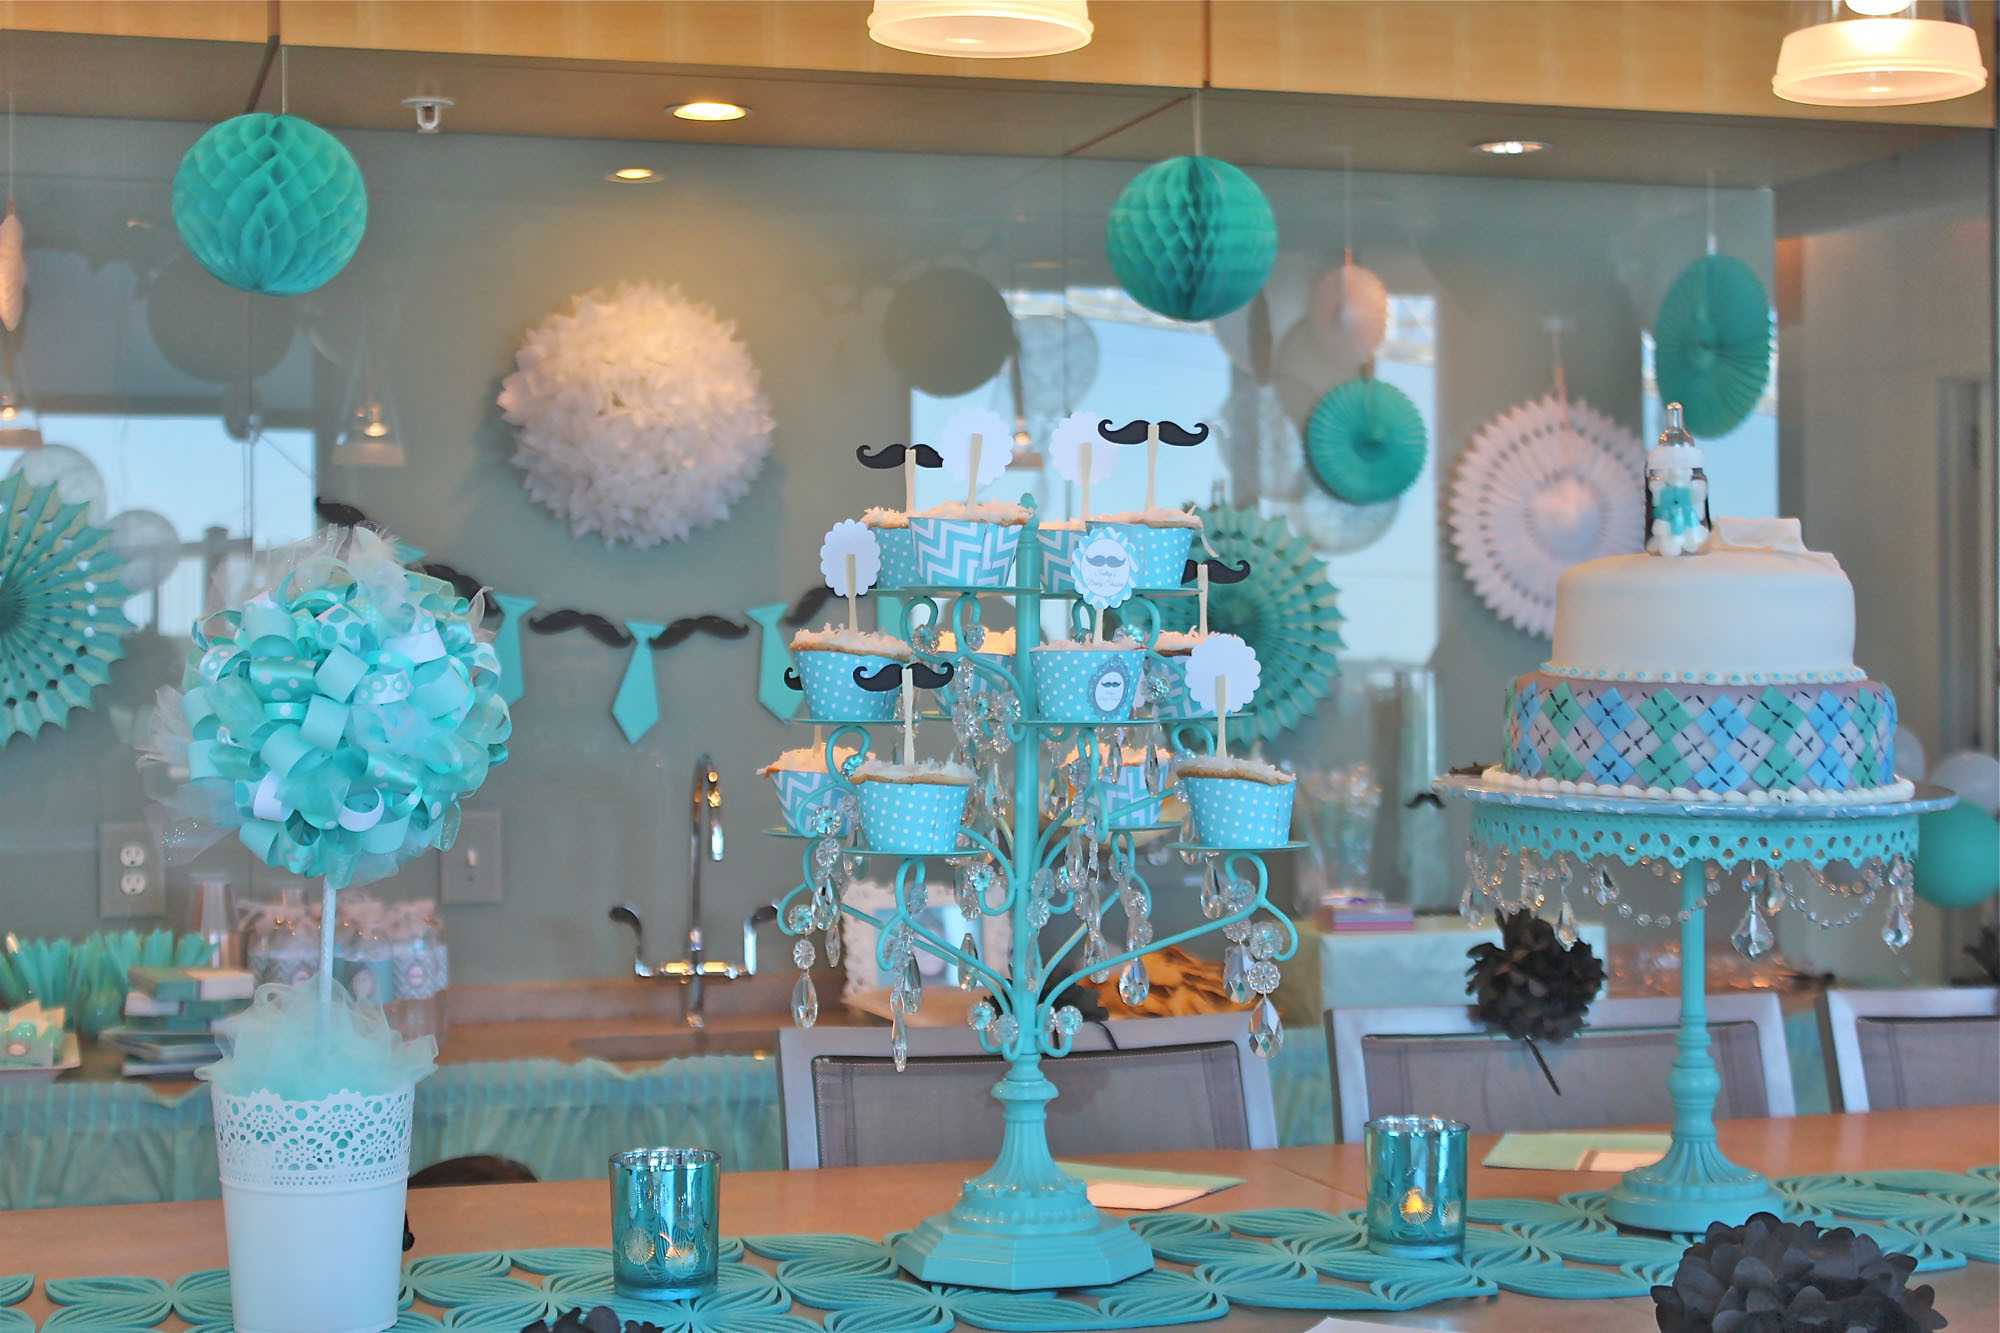 Elegant Baby Shower Decoration Ideas
 Baby Boy Shower Centerpieces for Tables that will be the